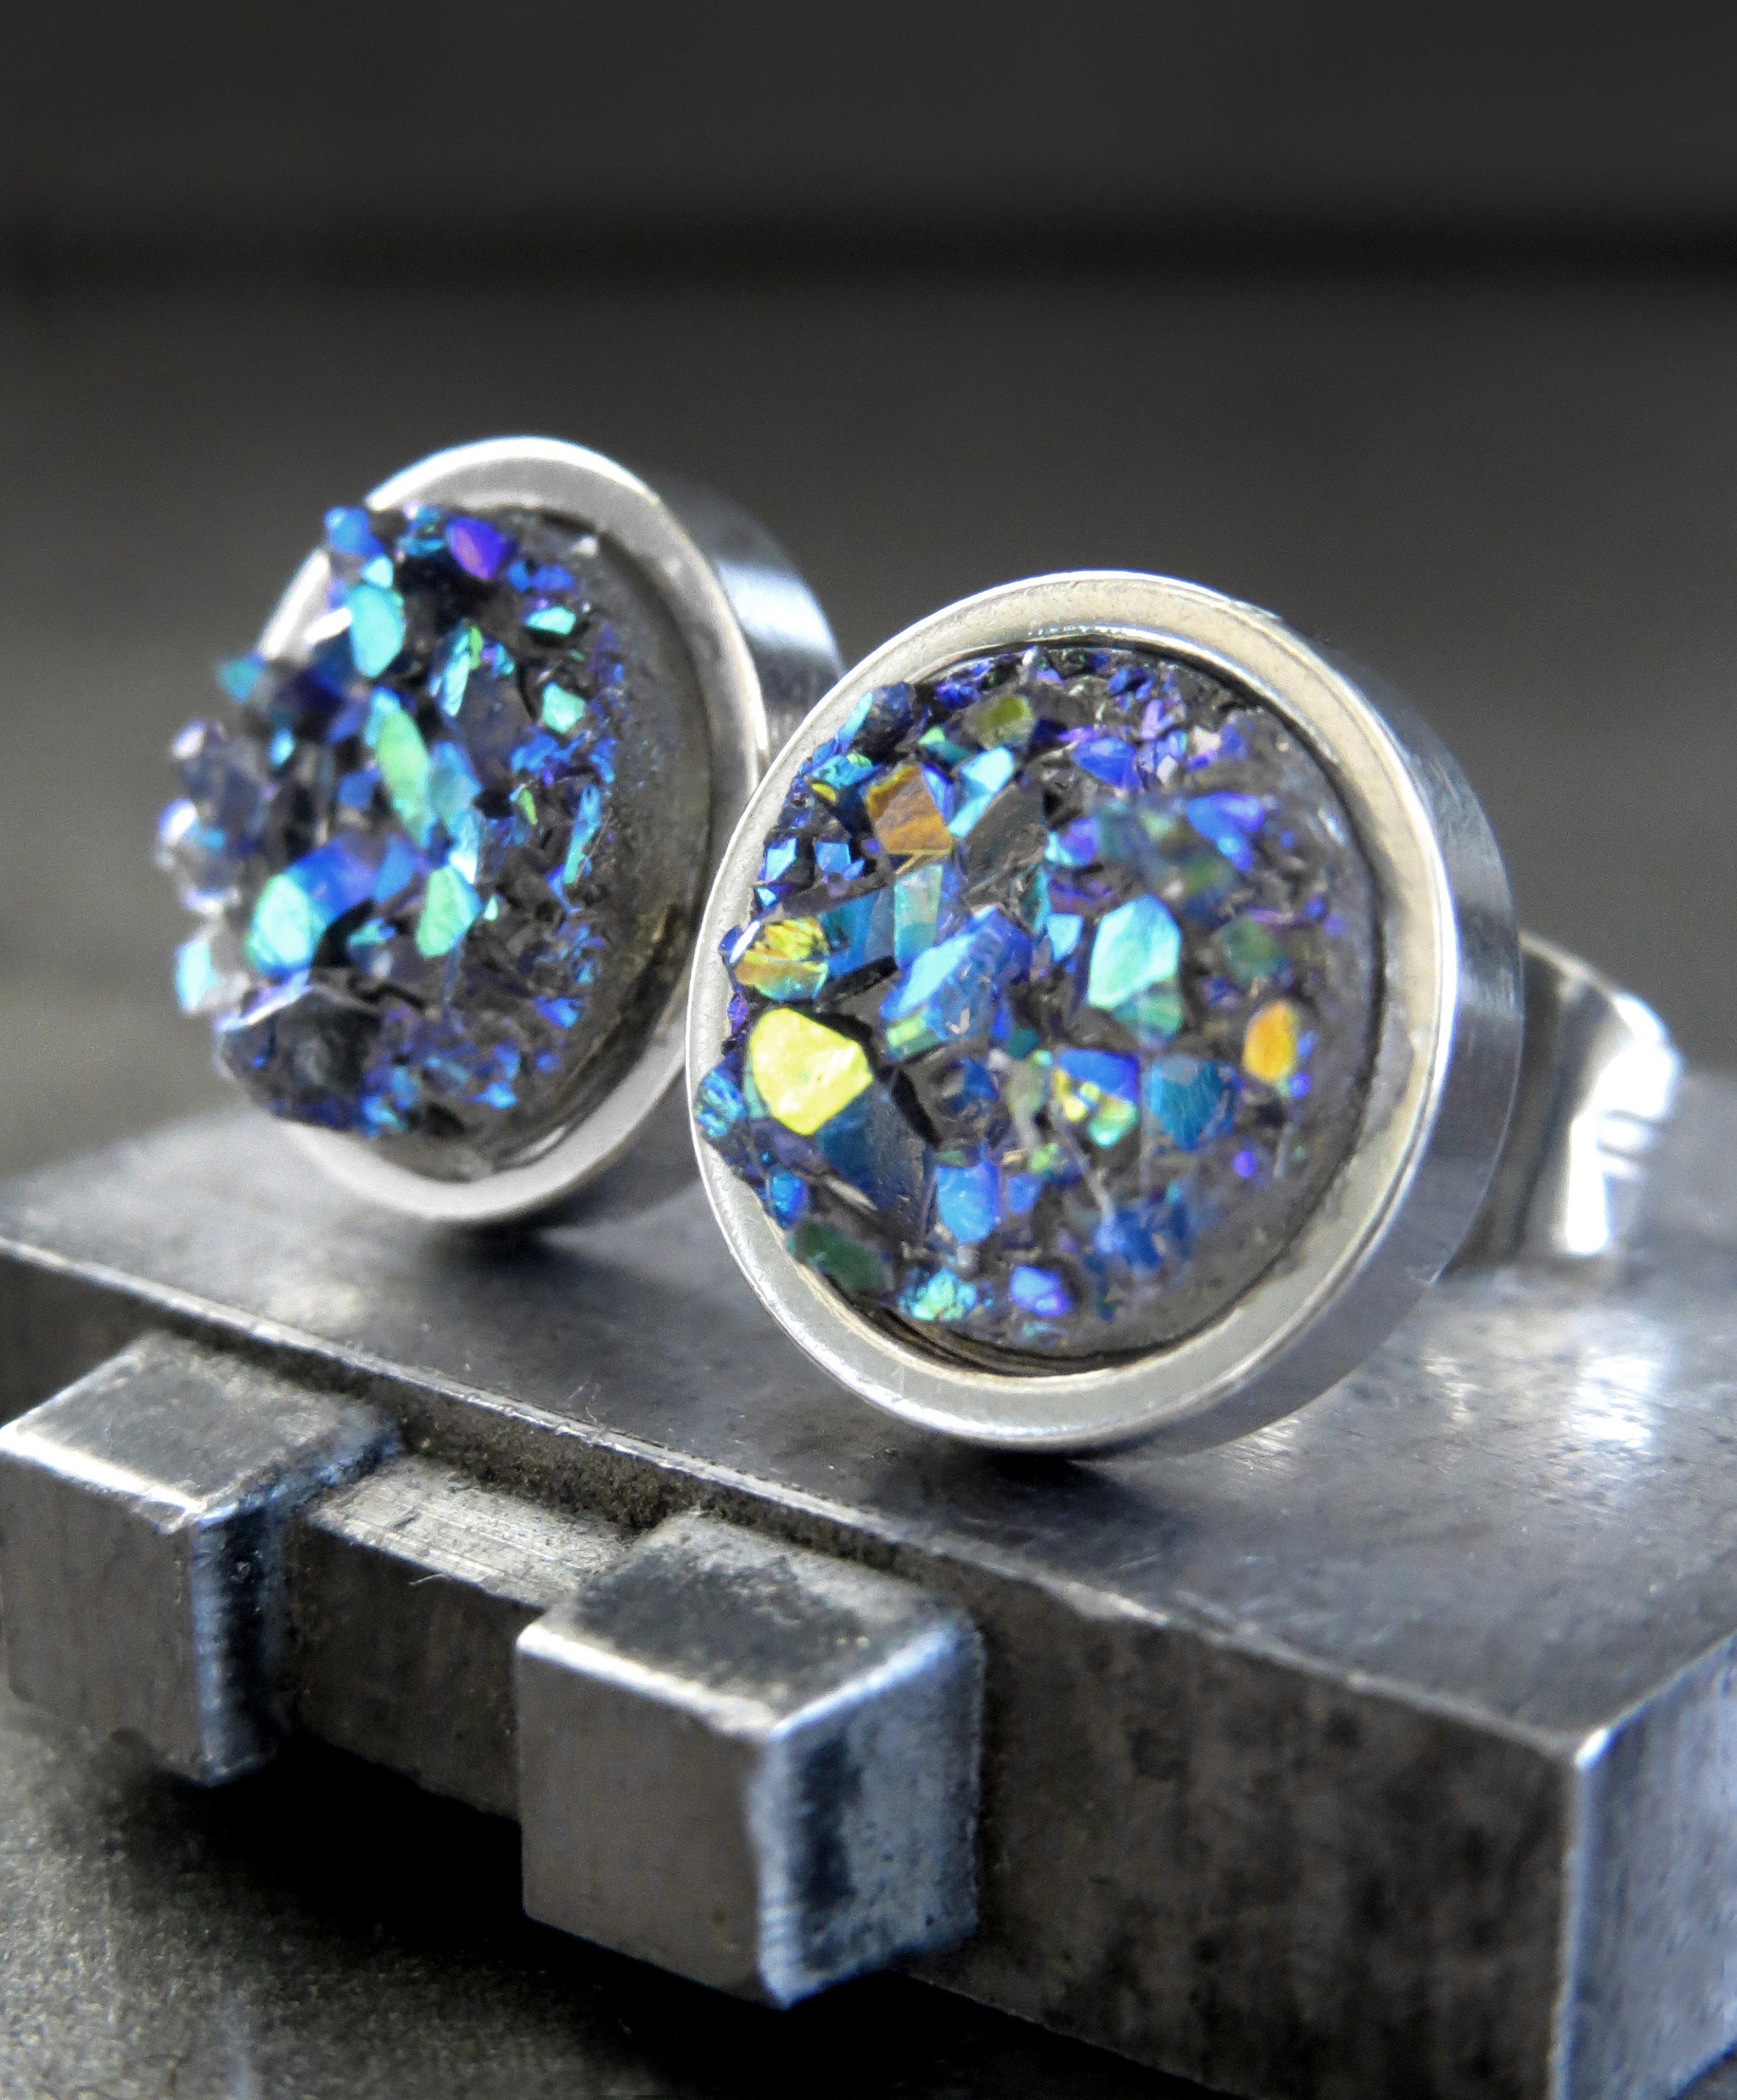 COLD AS ICE - Shimmer Blue Green Iridescent Stud Earrings with Grey Simulated Druzy - Unisex Womens Mens Large Stud Earrings, Modern Jewelry